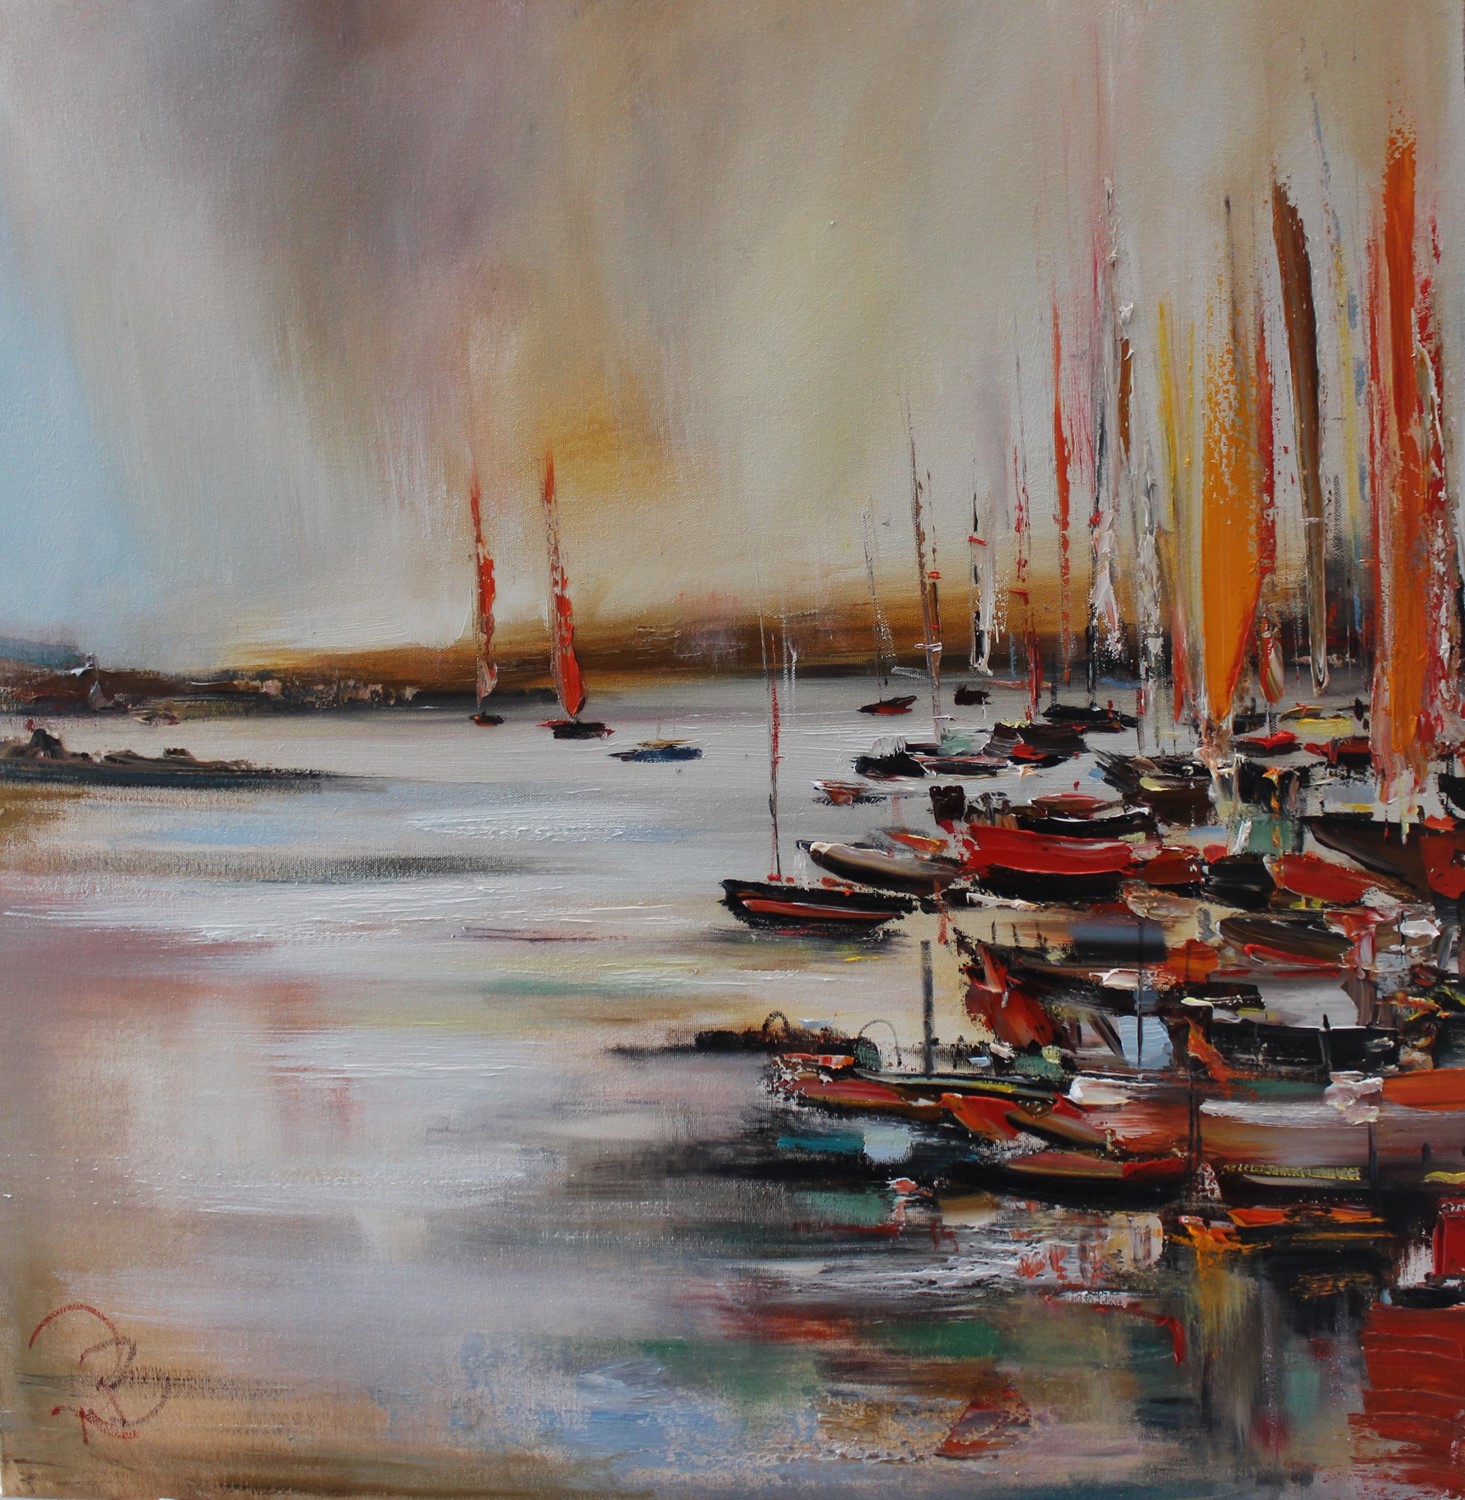 'At the Quay' by artist Rosanne Barr